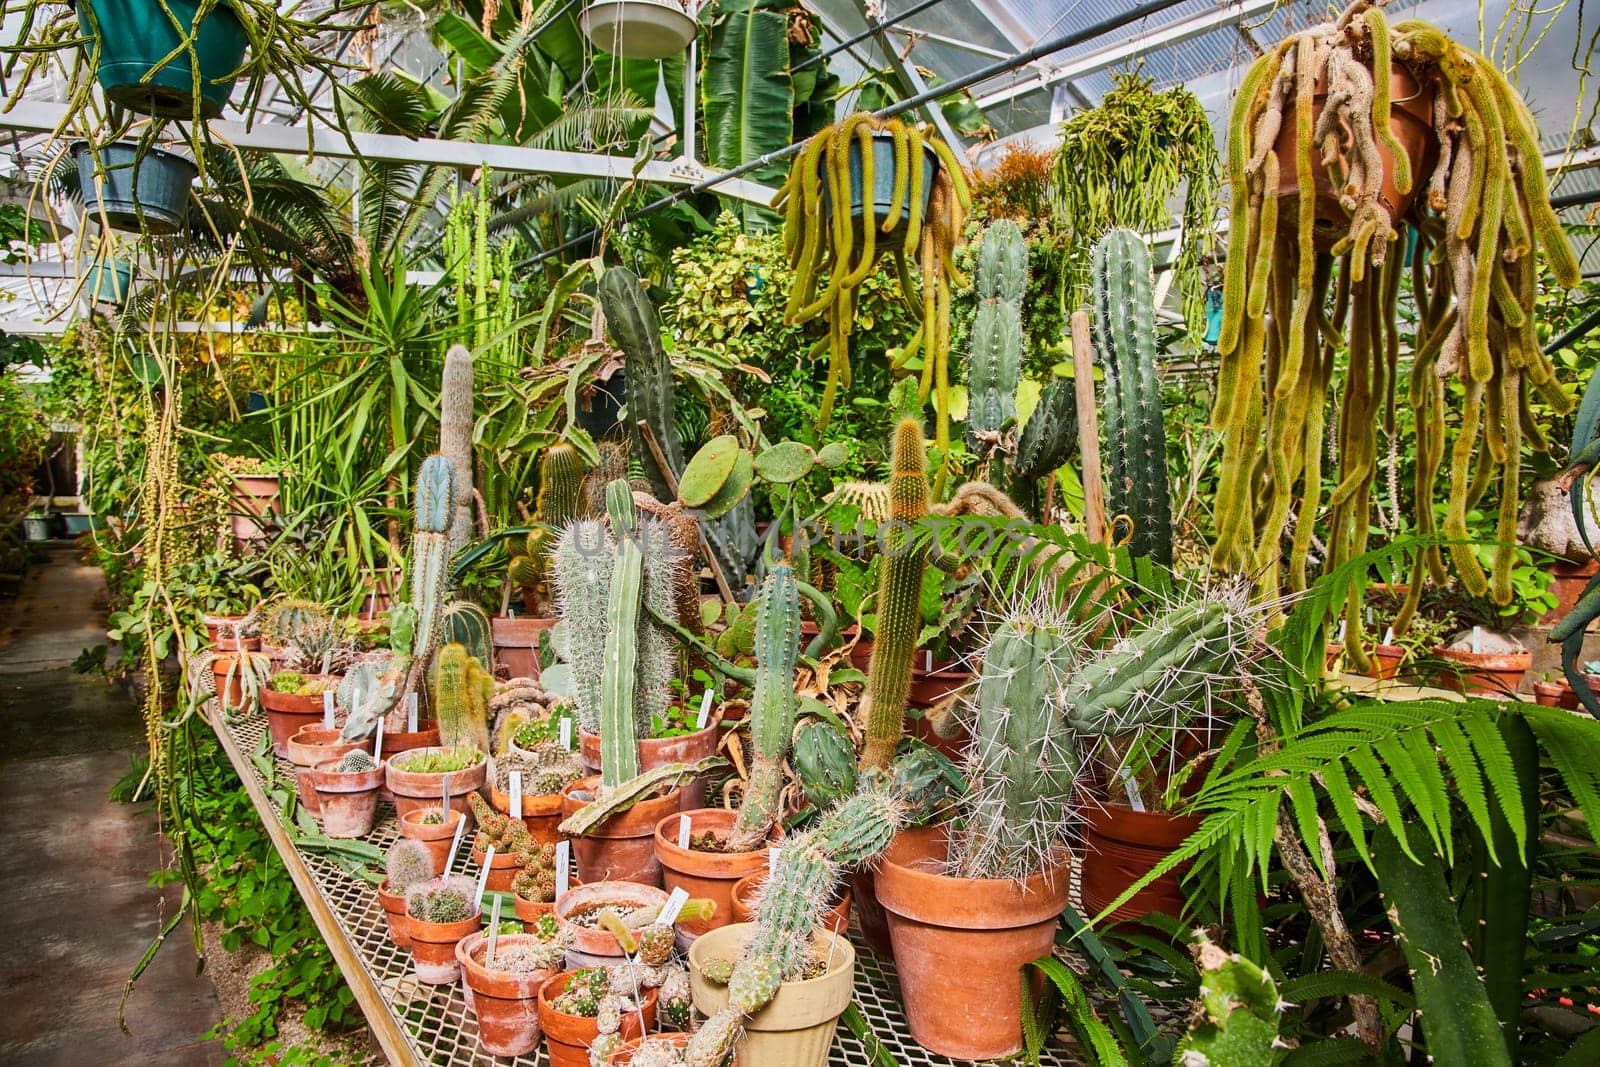 Lush Greenhouse Cacti and Succulents Collection in Muncie by njproductions